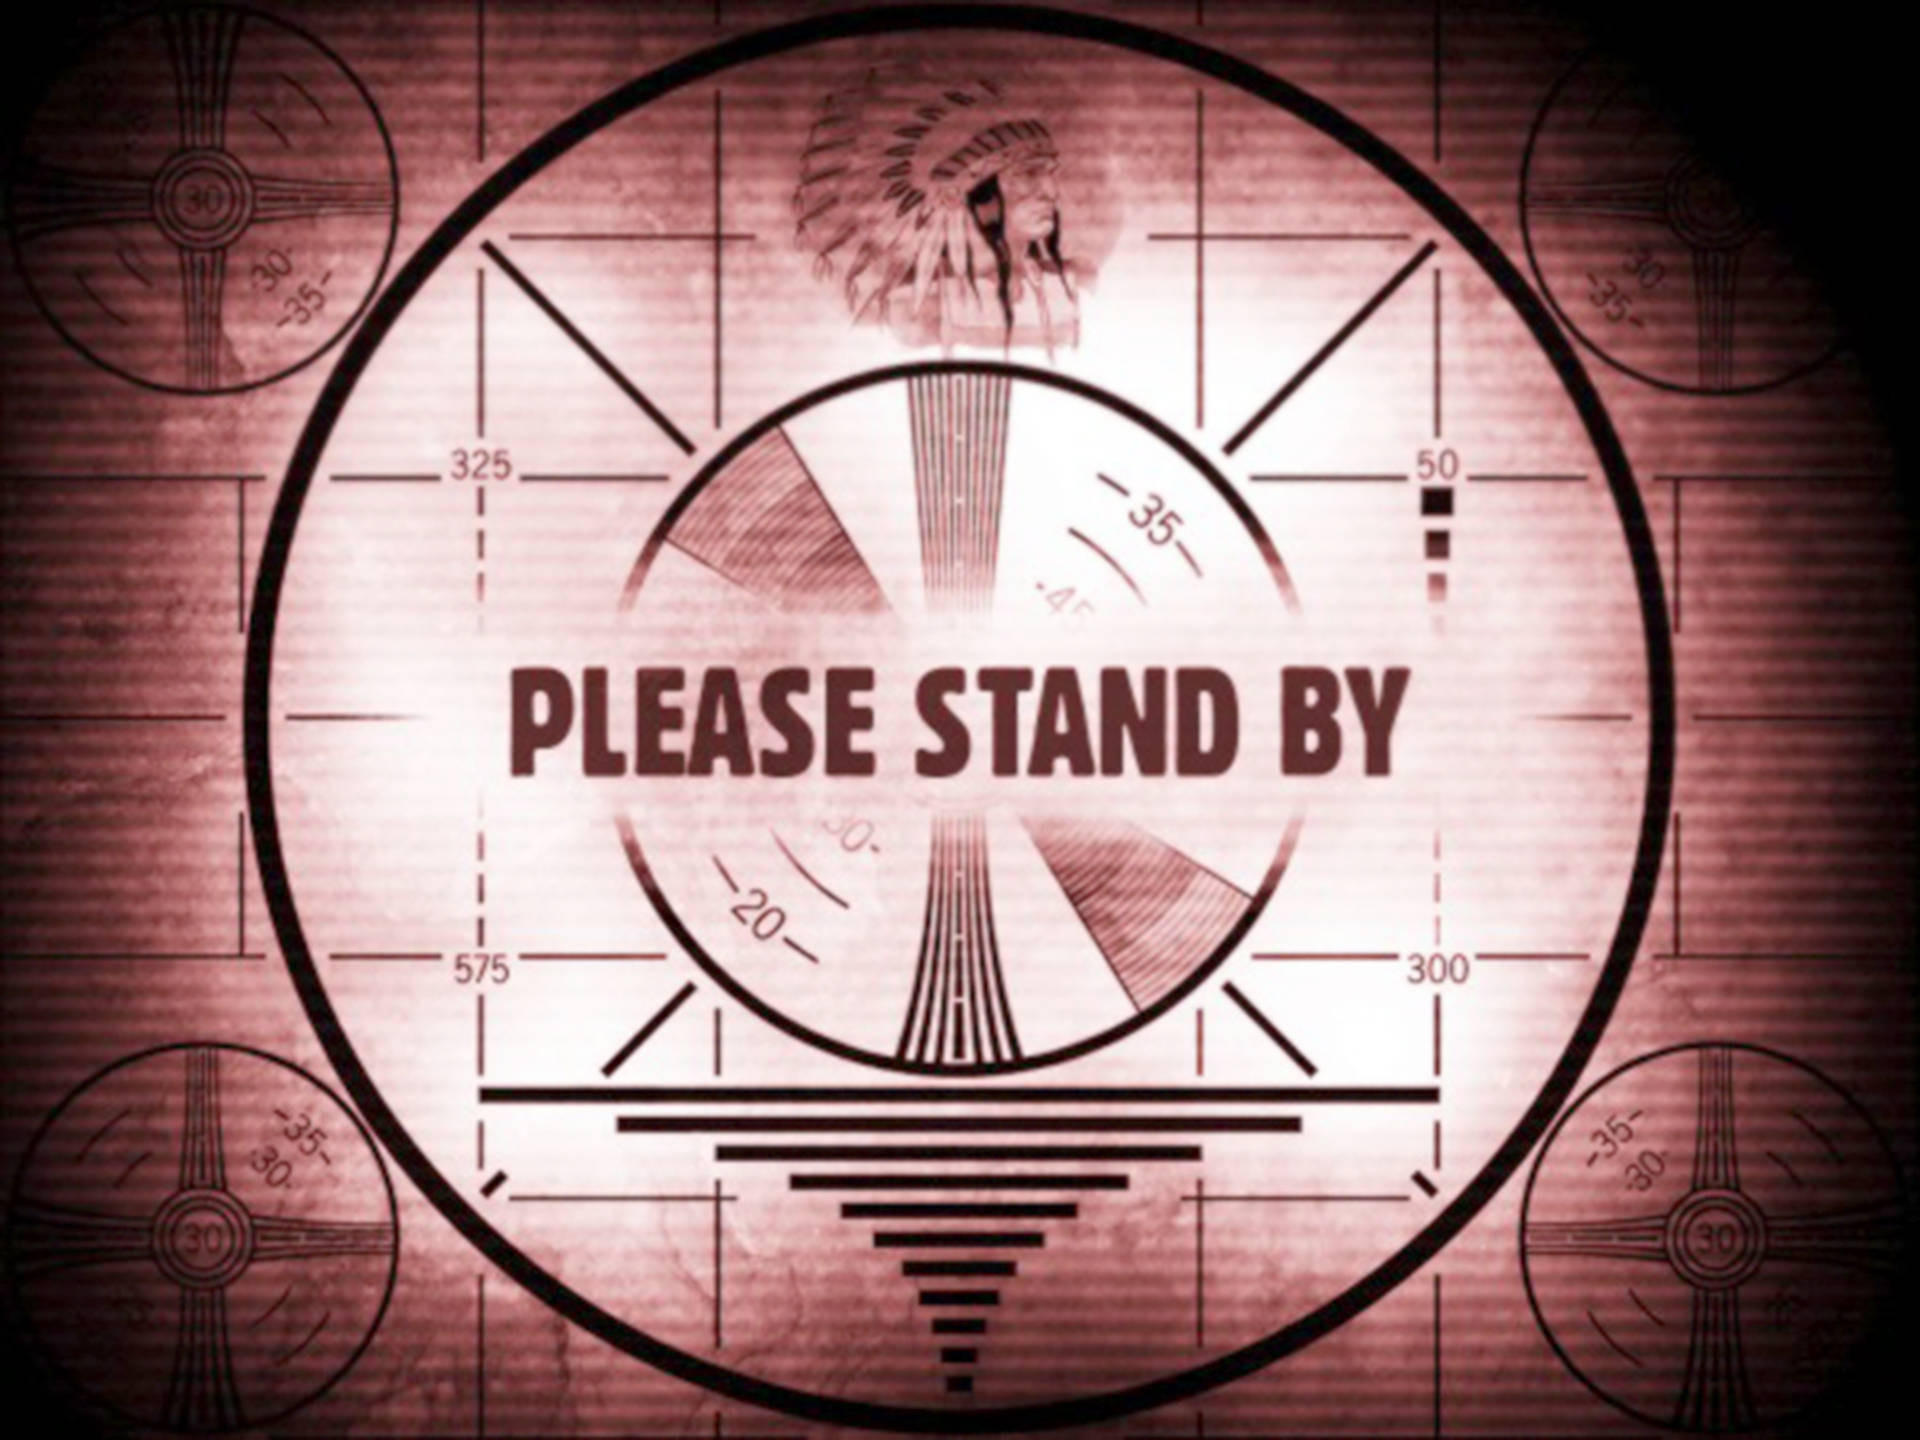 Please fast. Please Stand by экран Fallout. Плиз стенд бай. Фоллаут 4 please Stand by. Заставка please Stand by Fallout 4.